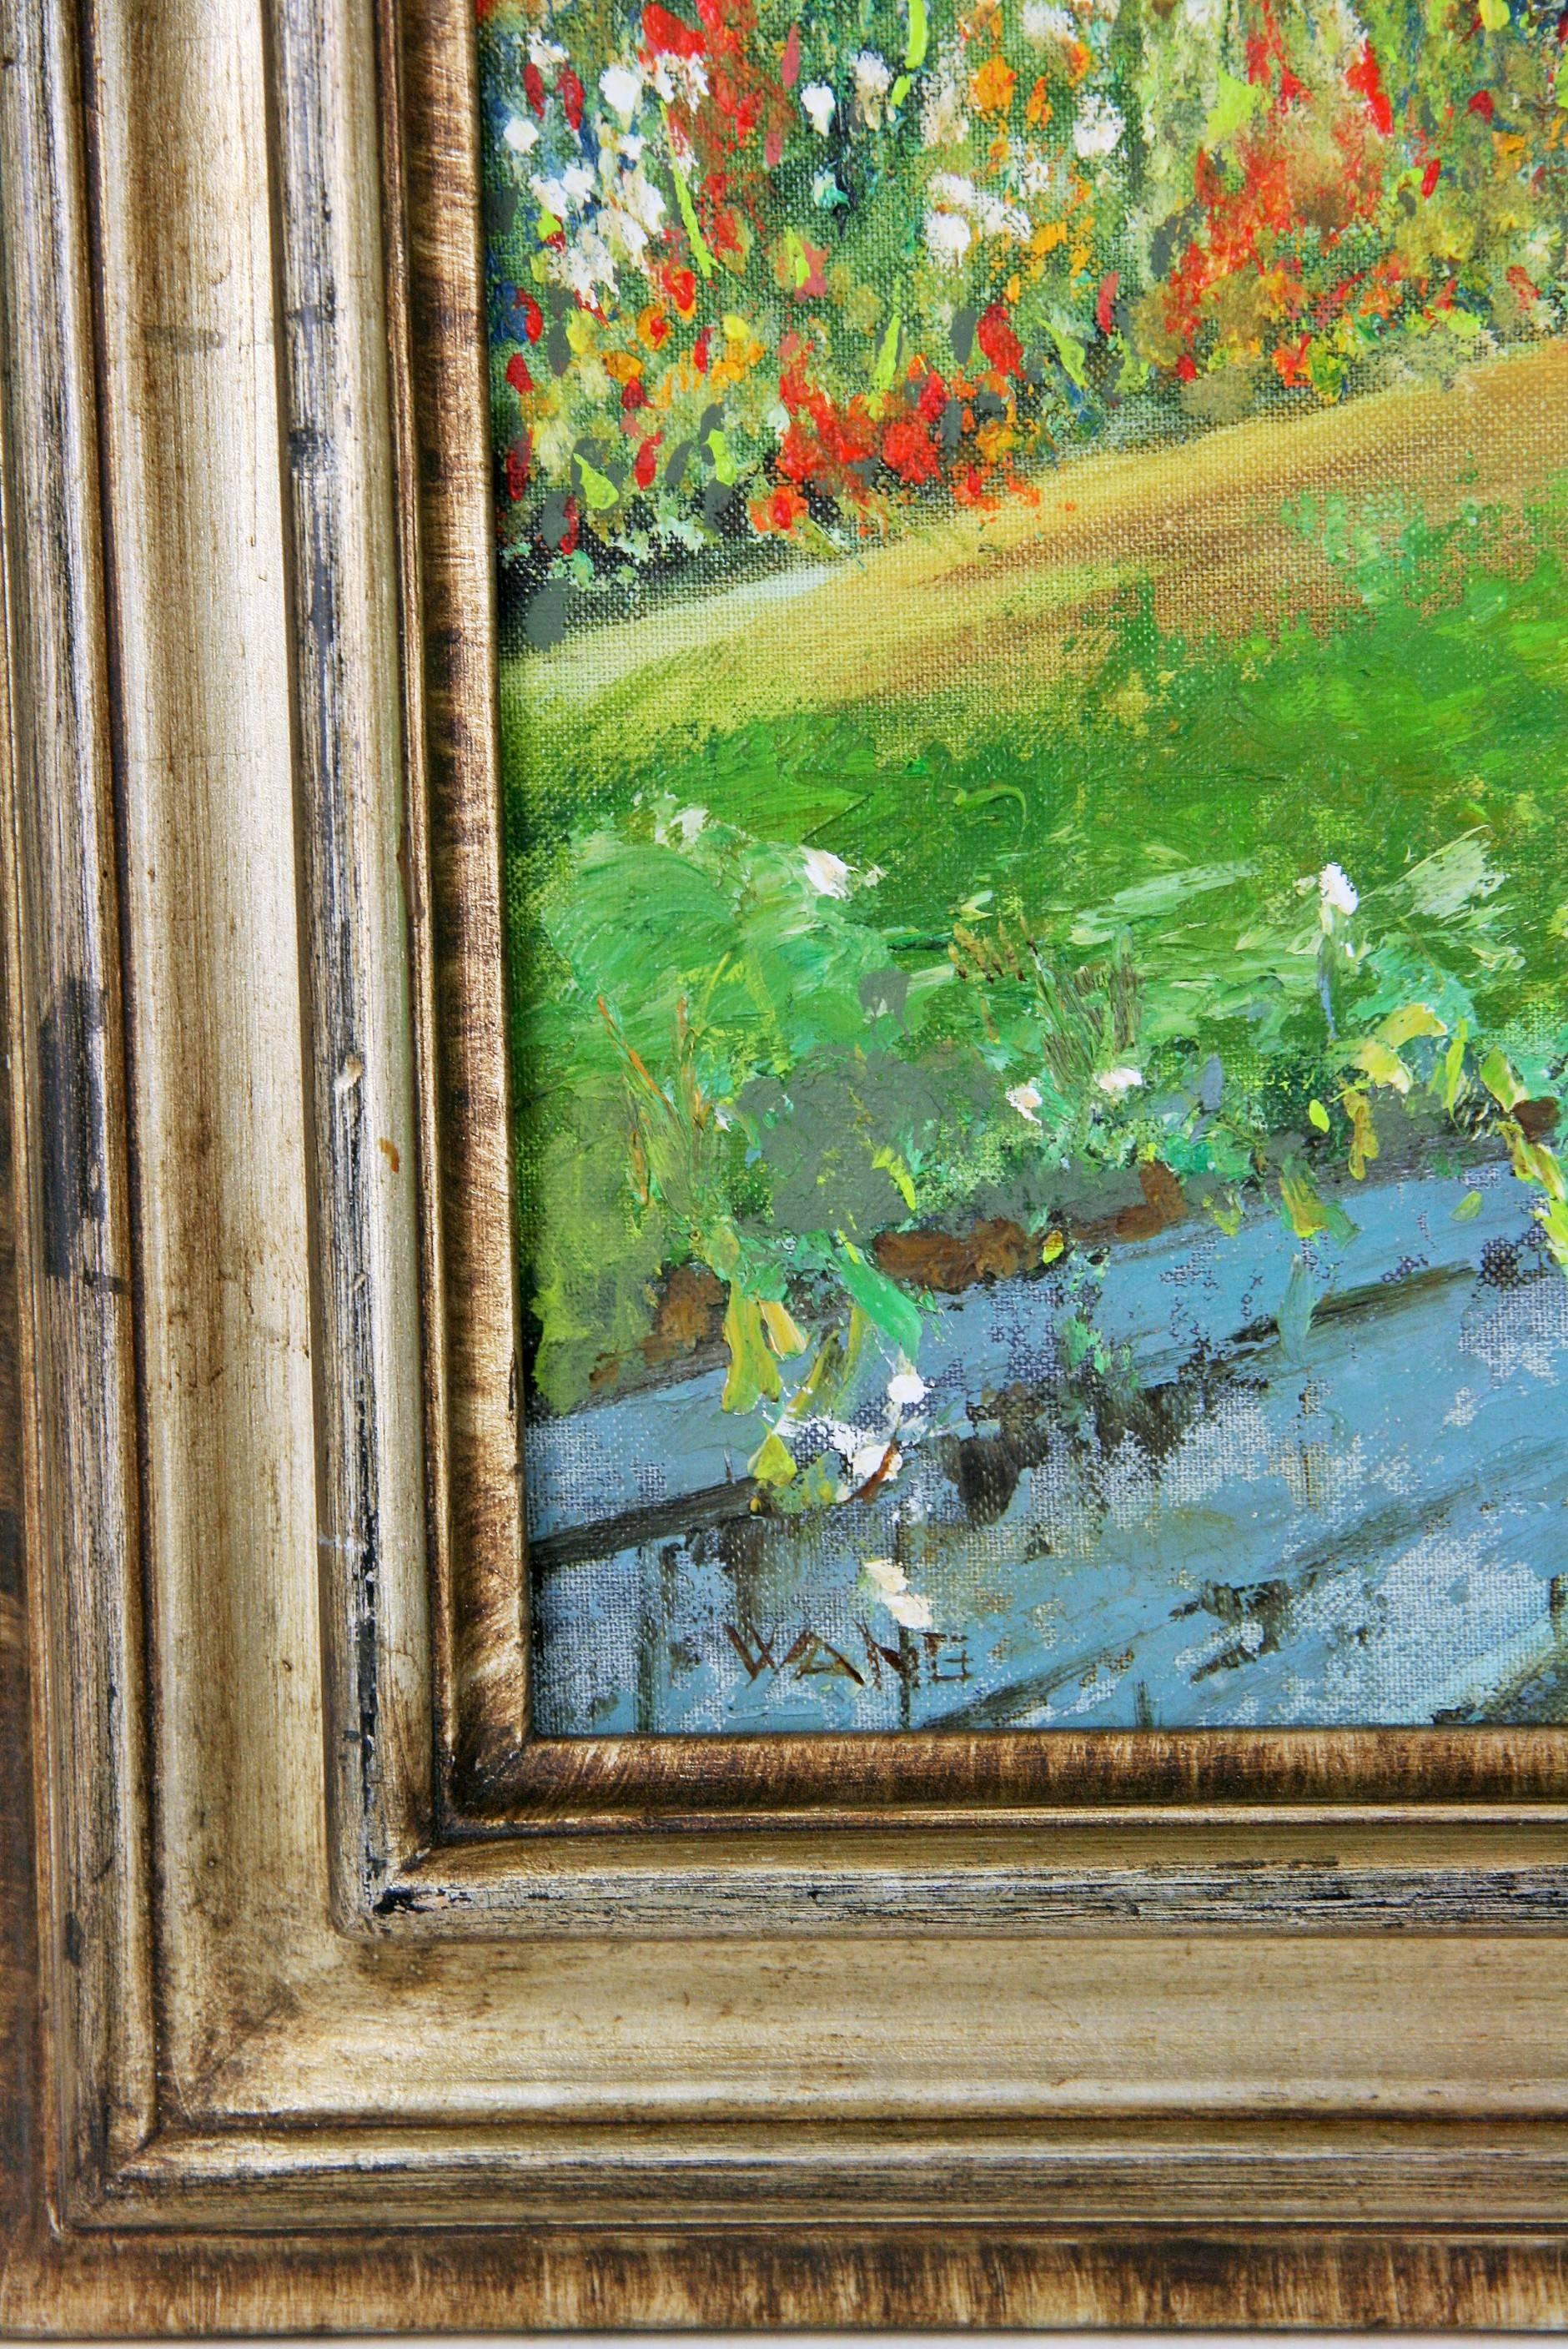 1-6011   A country house painting , acrylic on artist board displayed in a gilt-silver wood frame,signed lower left by Wang.
Image size 17 H x 12.5 W